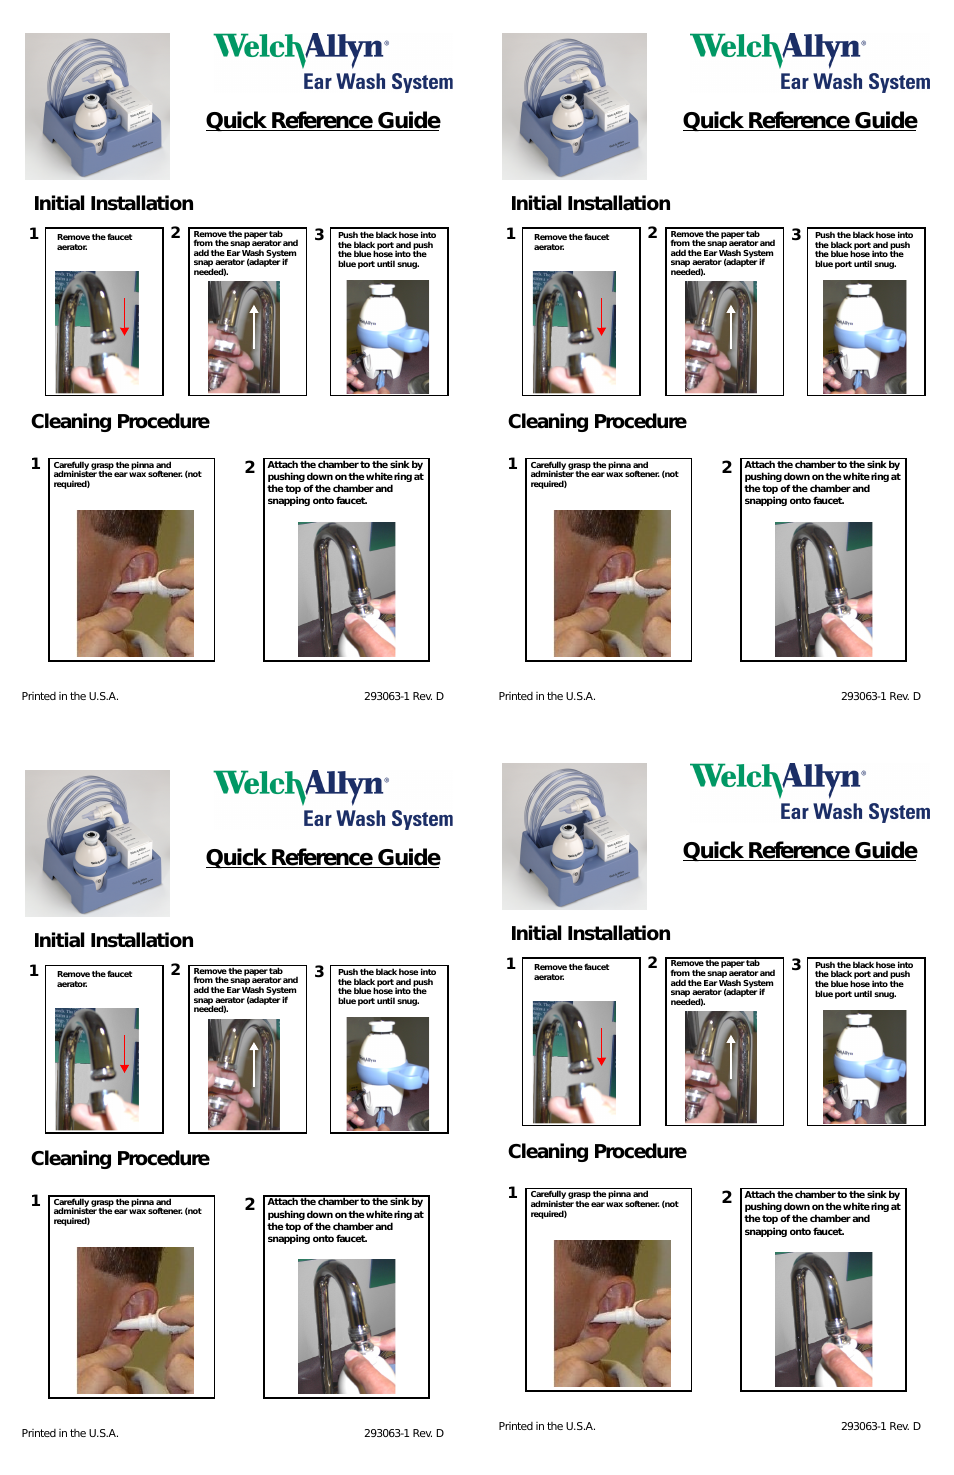 Ear Wash System - Quick Reference Guide